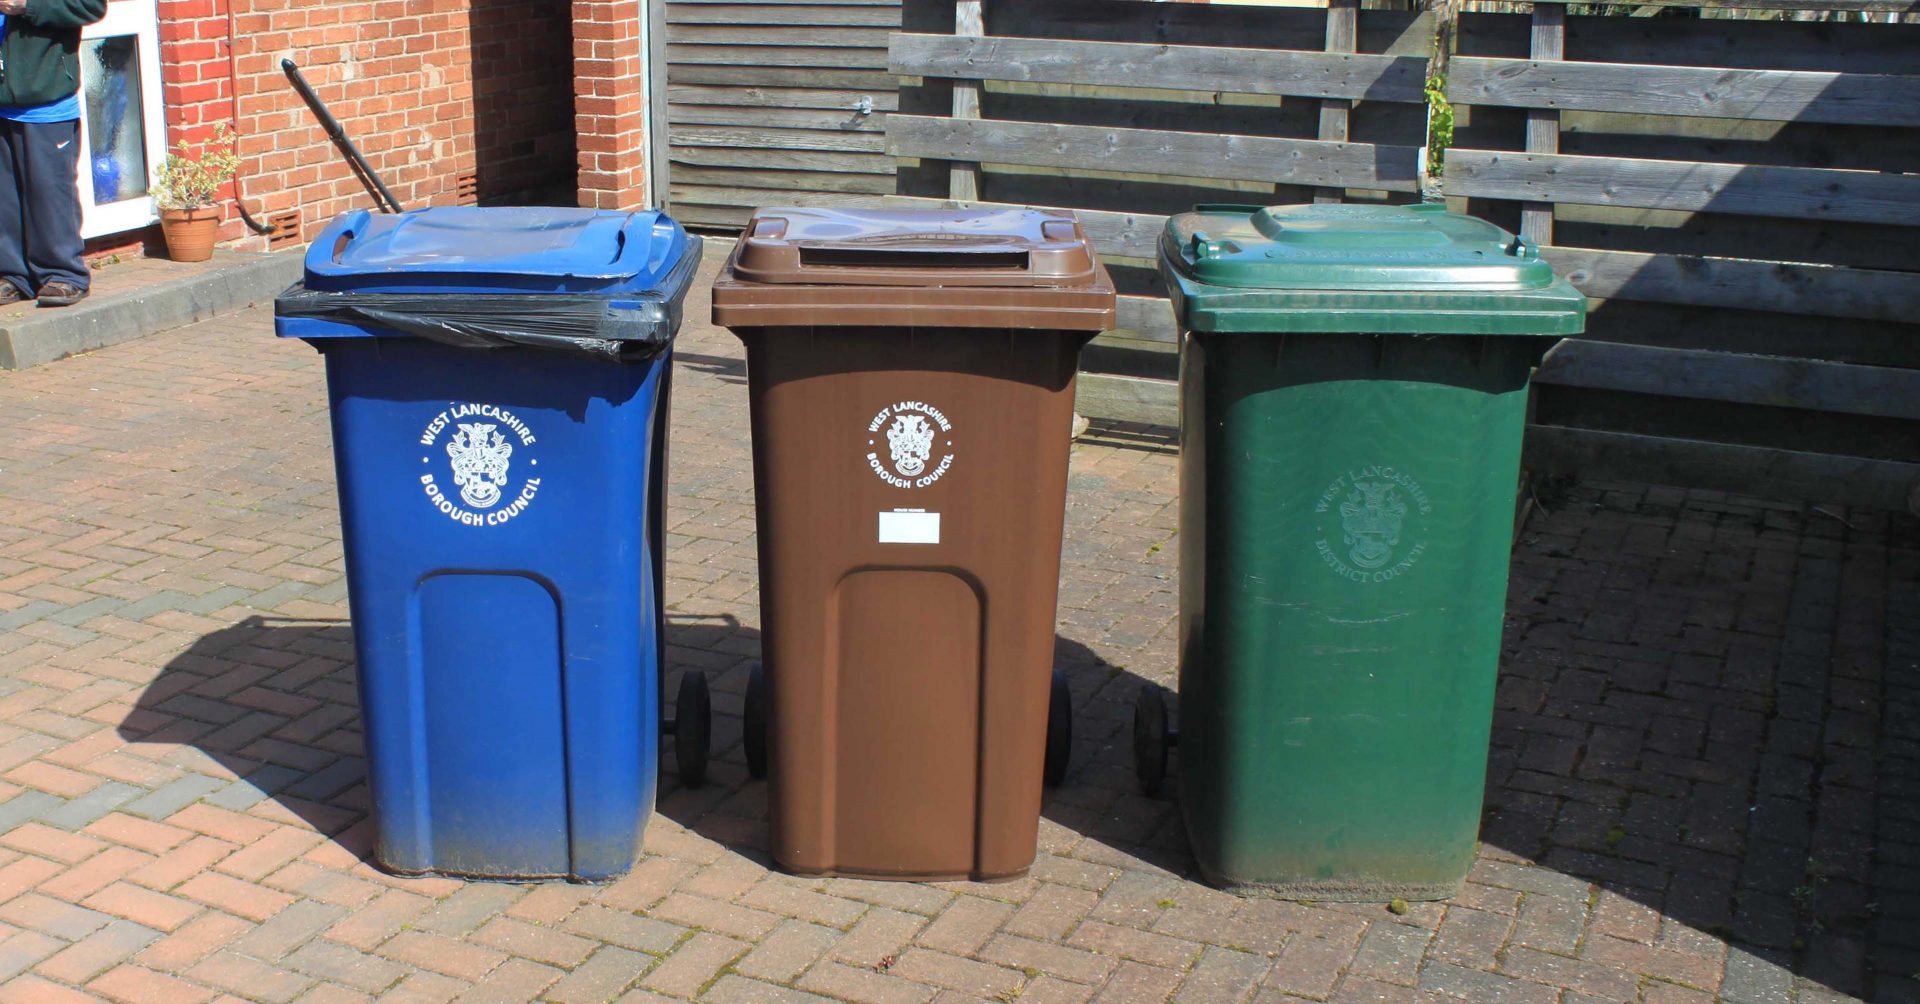 Three different coloured WLBC recycling bins